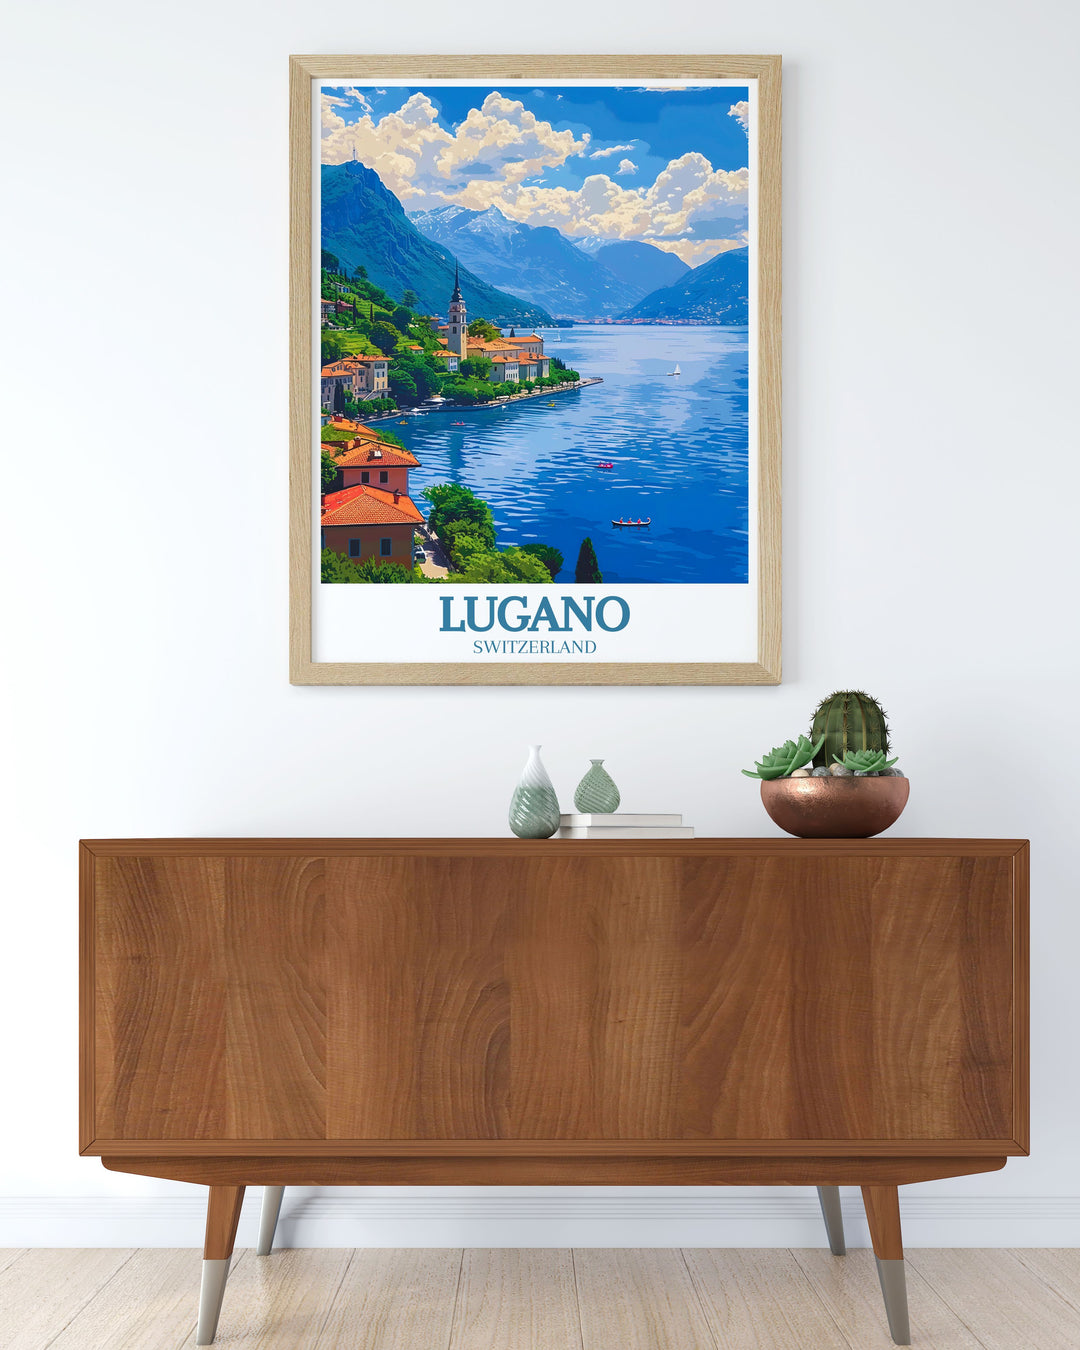 This art print features the picturesque Lake Lugano, capturing its serene waters and surrounding majestic mountains. Ideal for those who love peaceful settings and natural beauty.